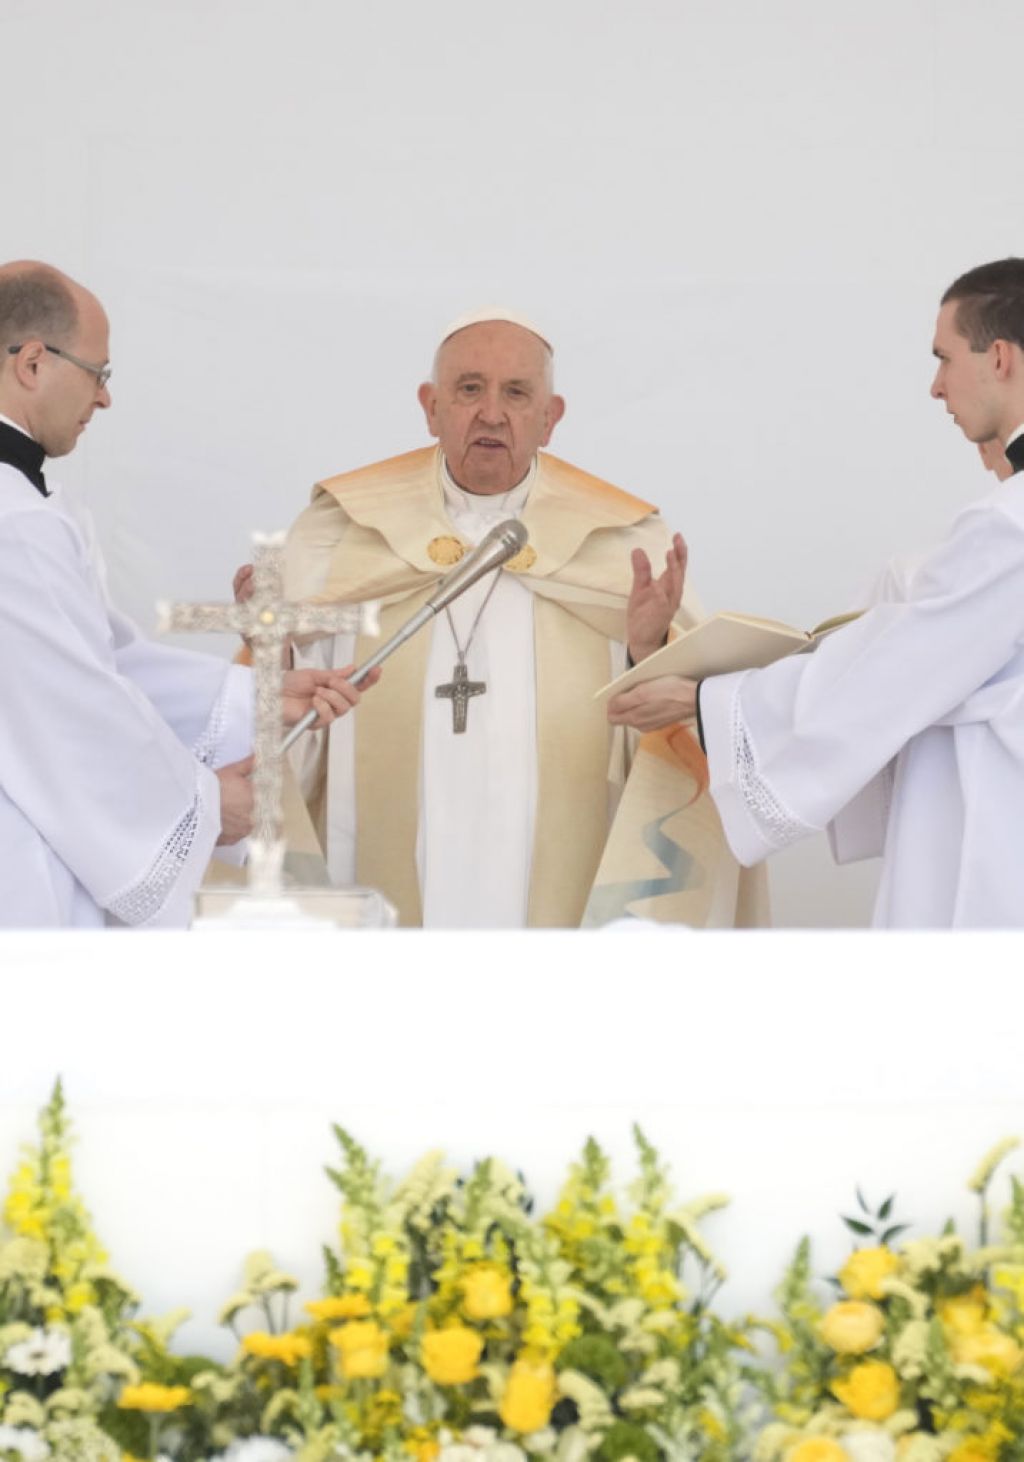 Pope urges Hungary to ‘open doors to others’ during Mass on banks of Danube